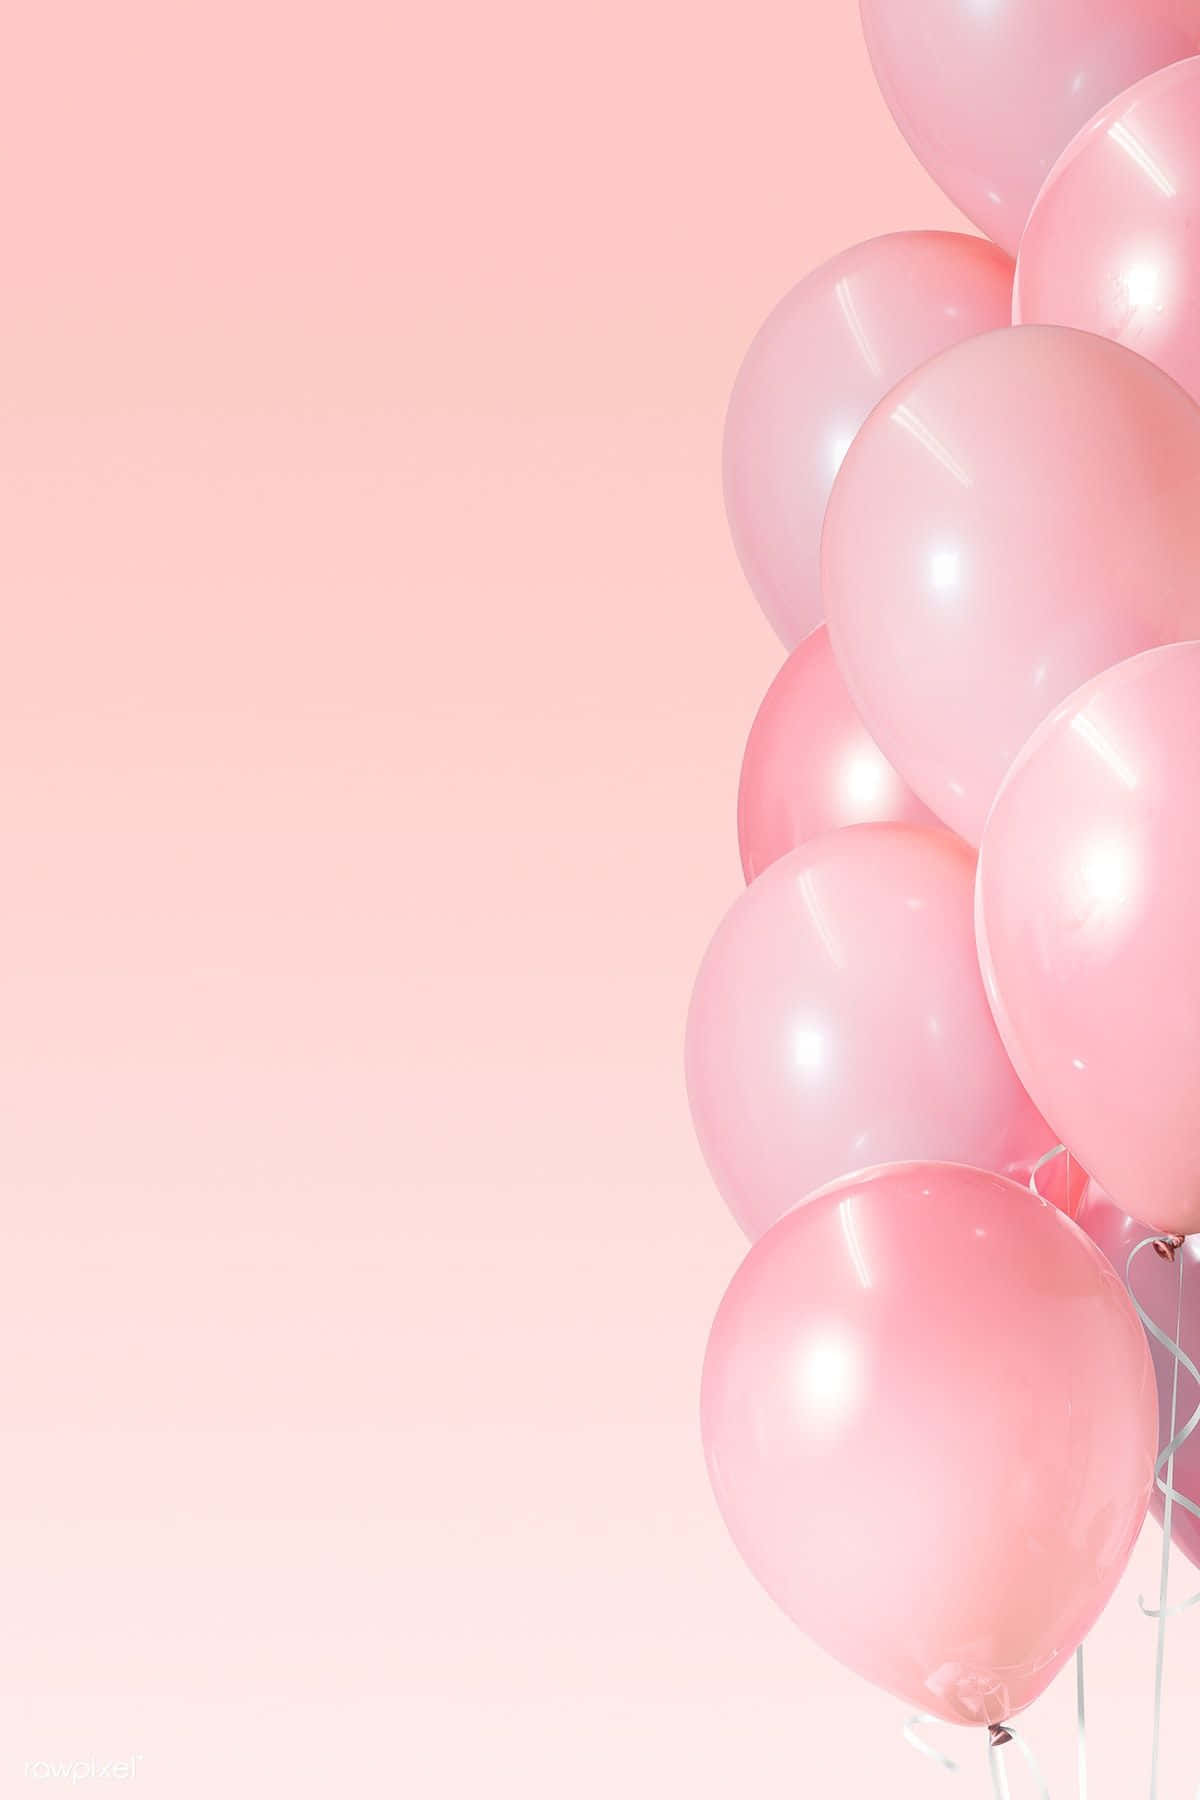 Pink balloons float in the sky, creating a beautiful pink ambiance.